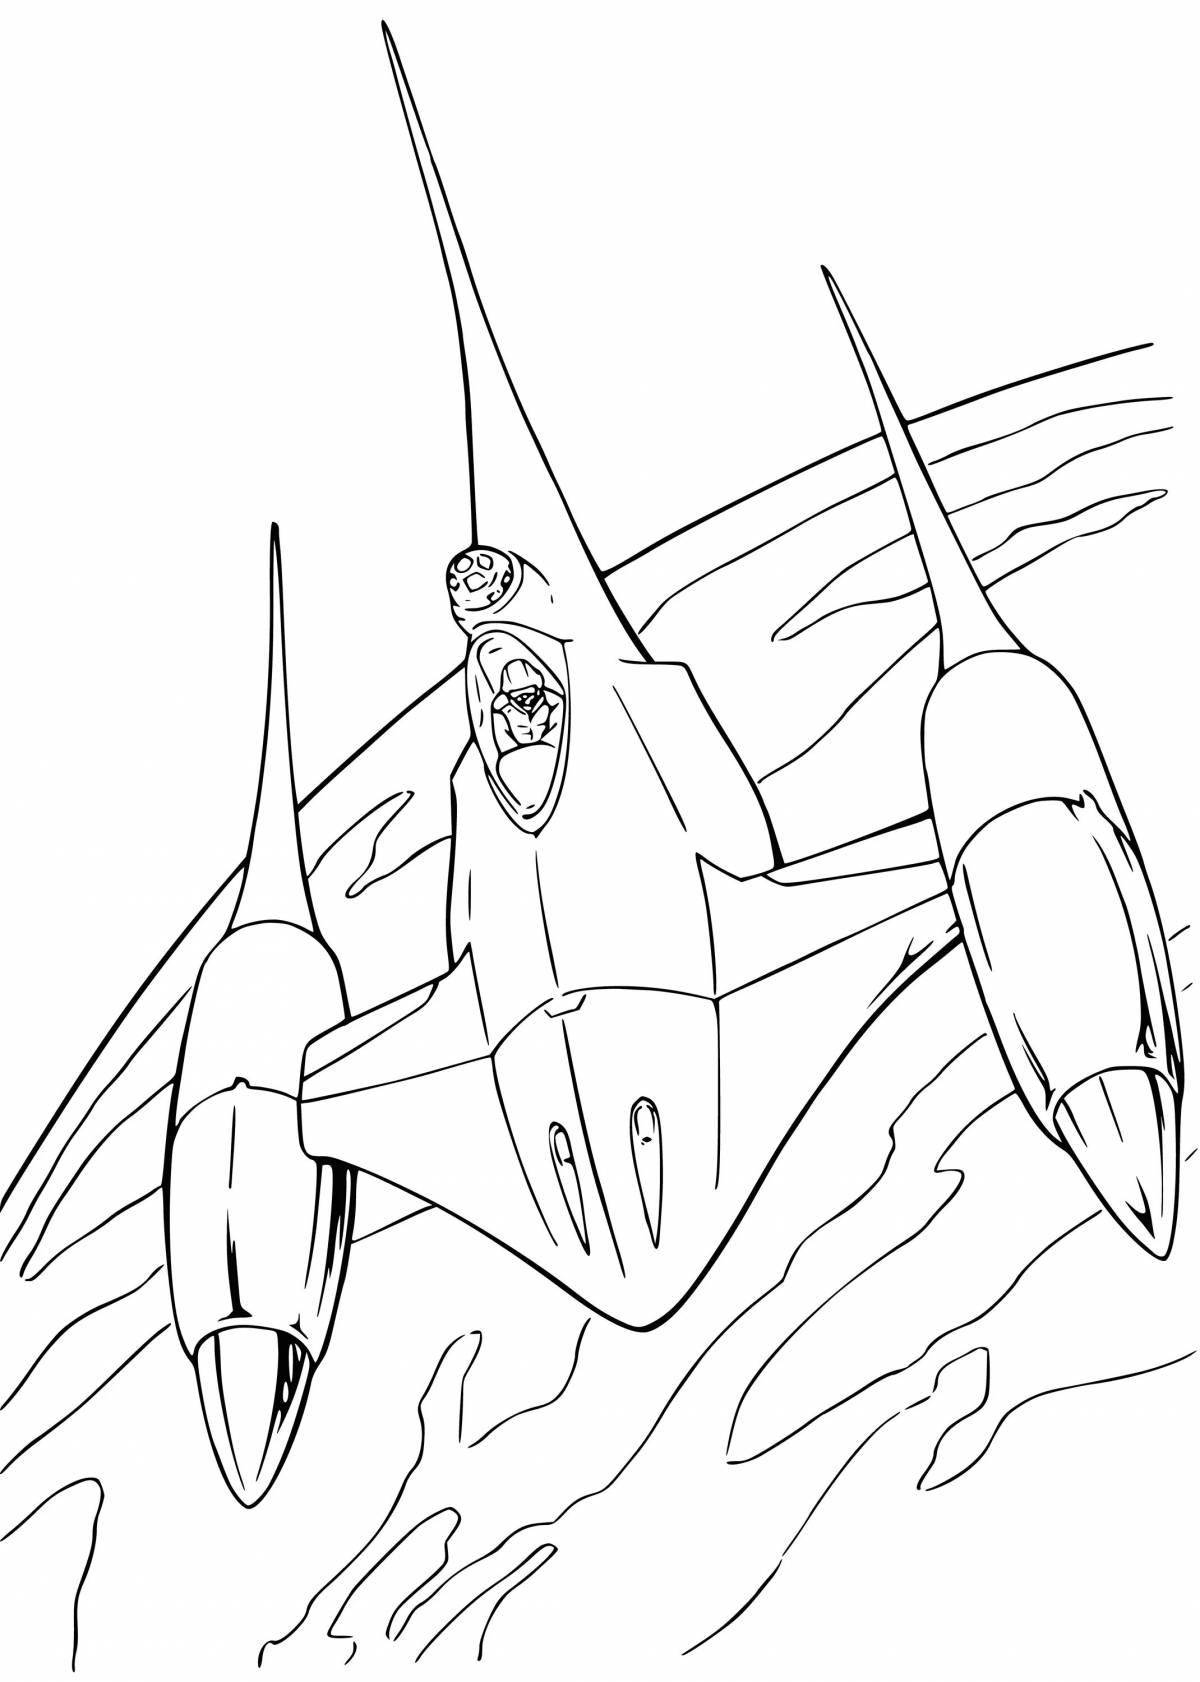 Radiant space wars coloring page